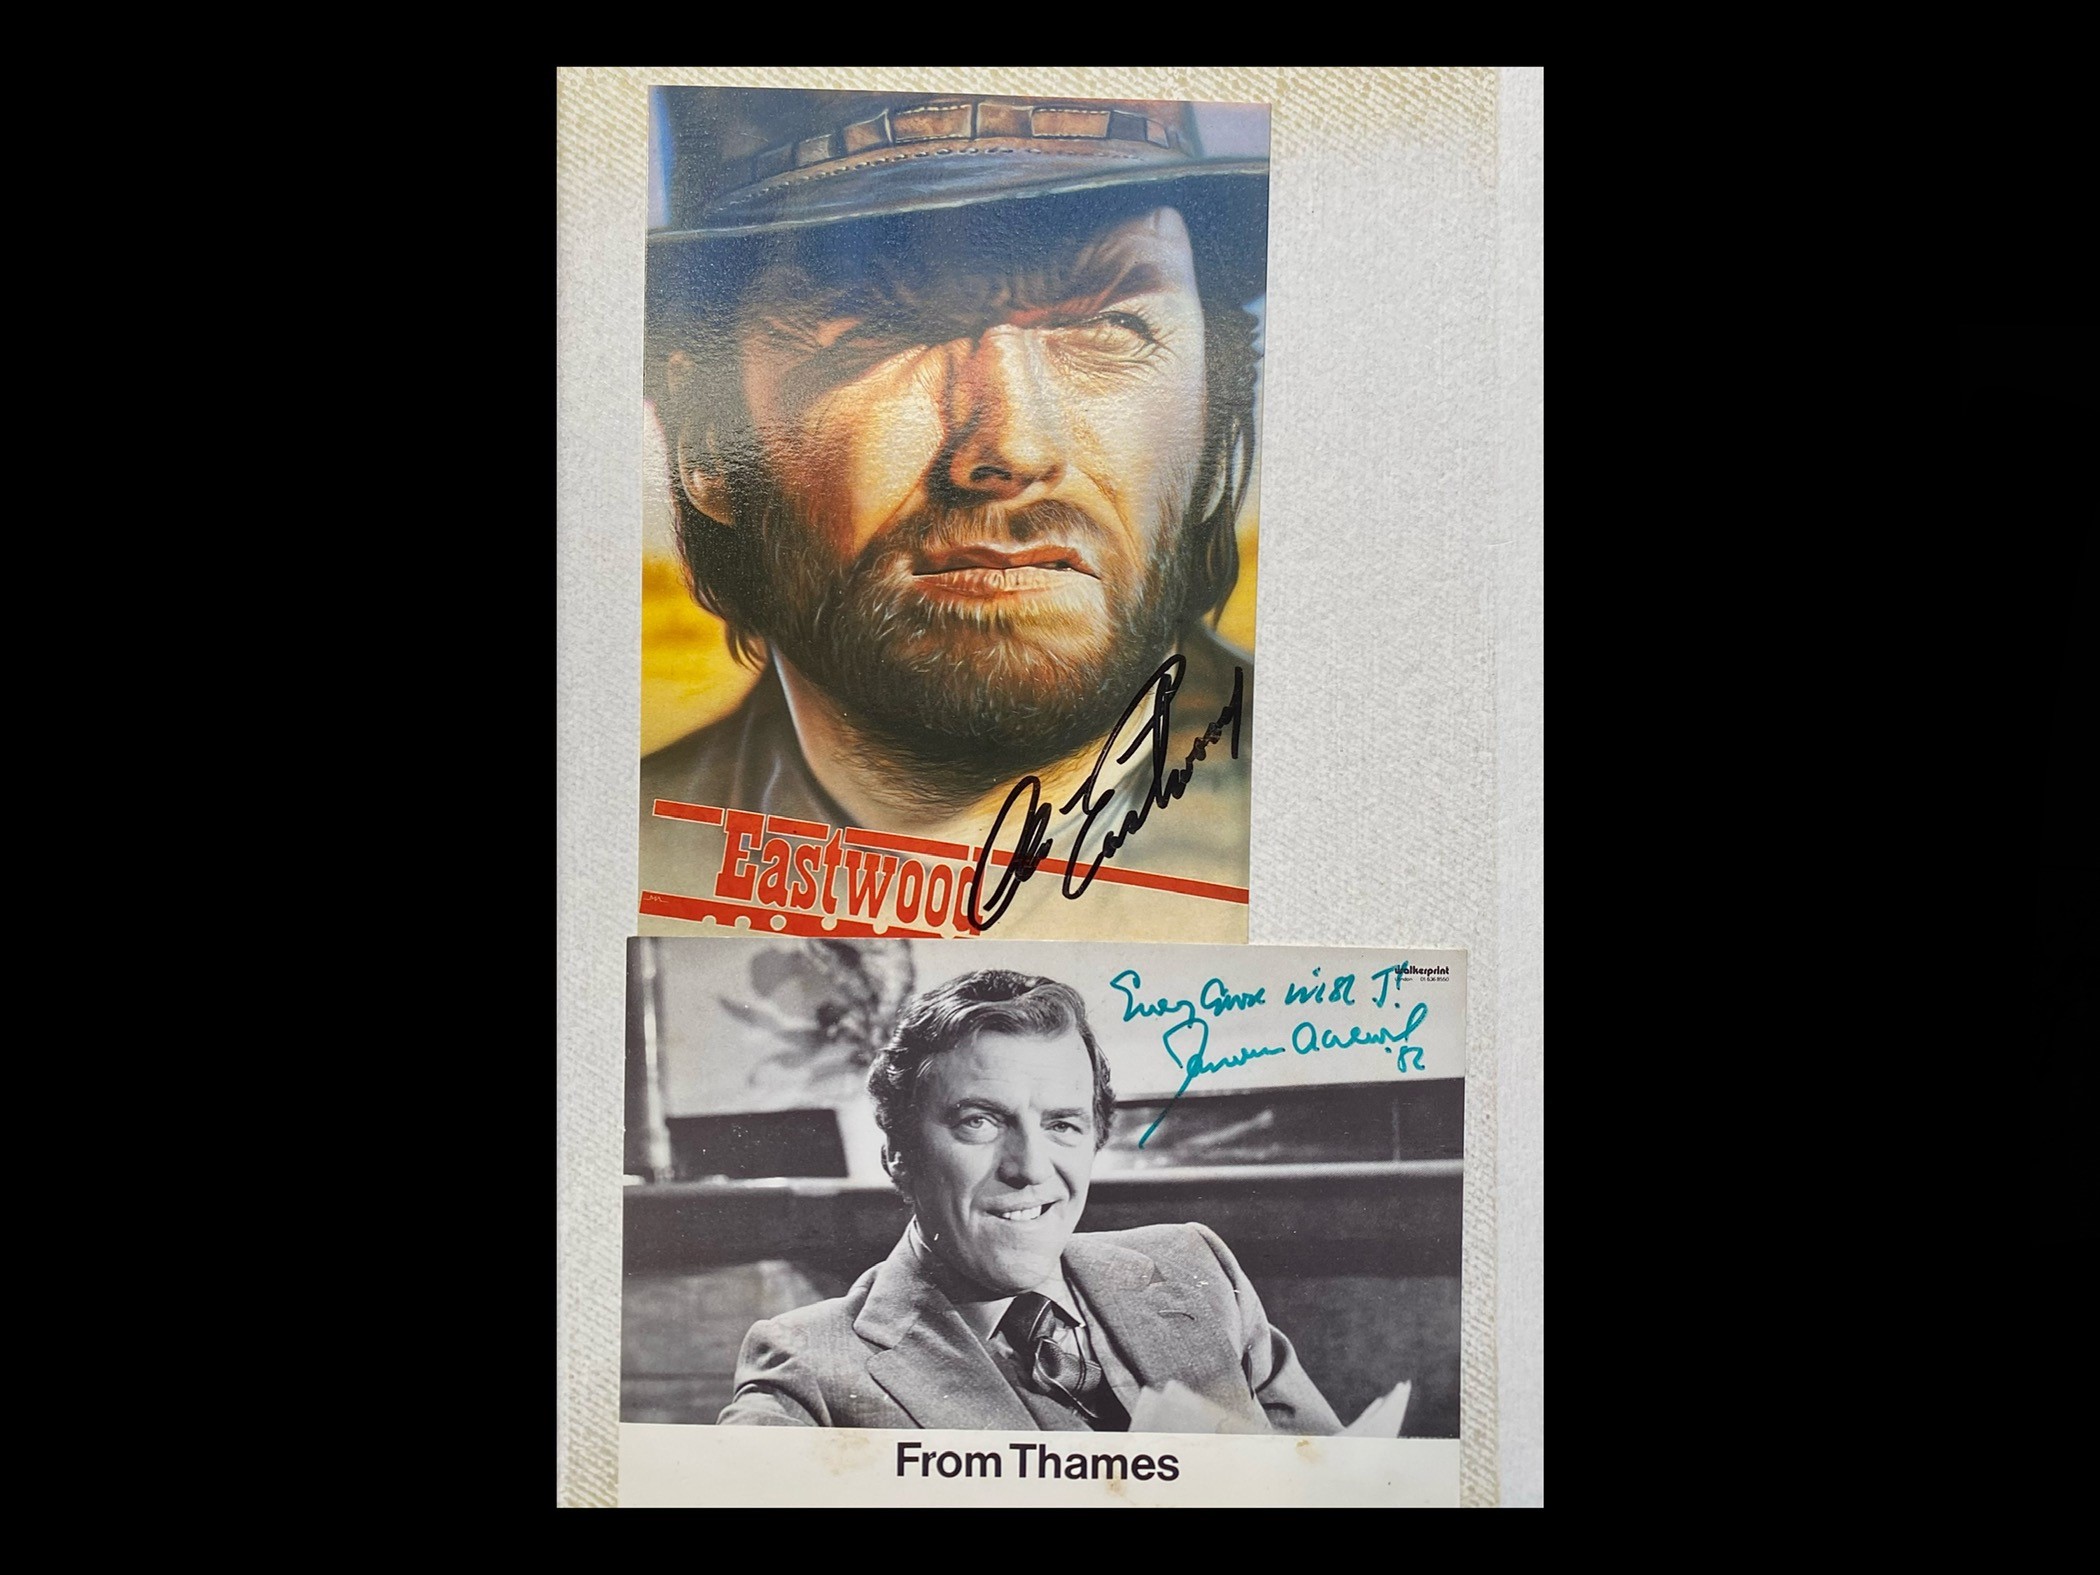 Clint Eastwood Interest - Photographs of Clint Eastwood as Dirty Harry, photographs signed. - Image 3 of 4